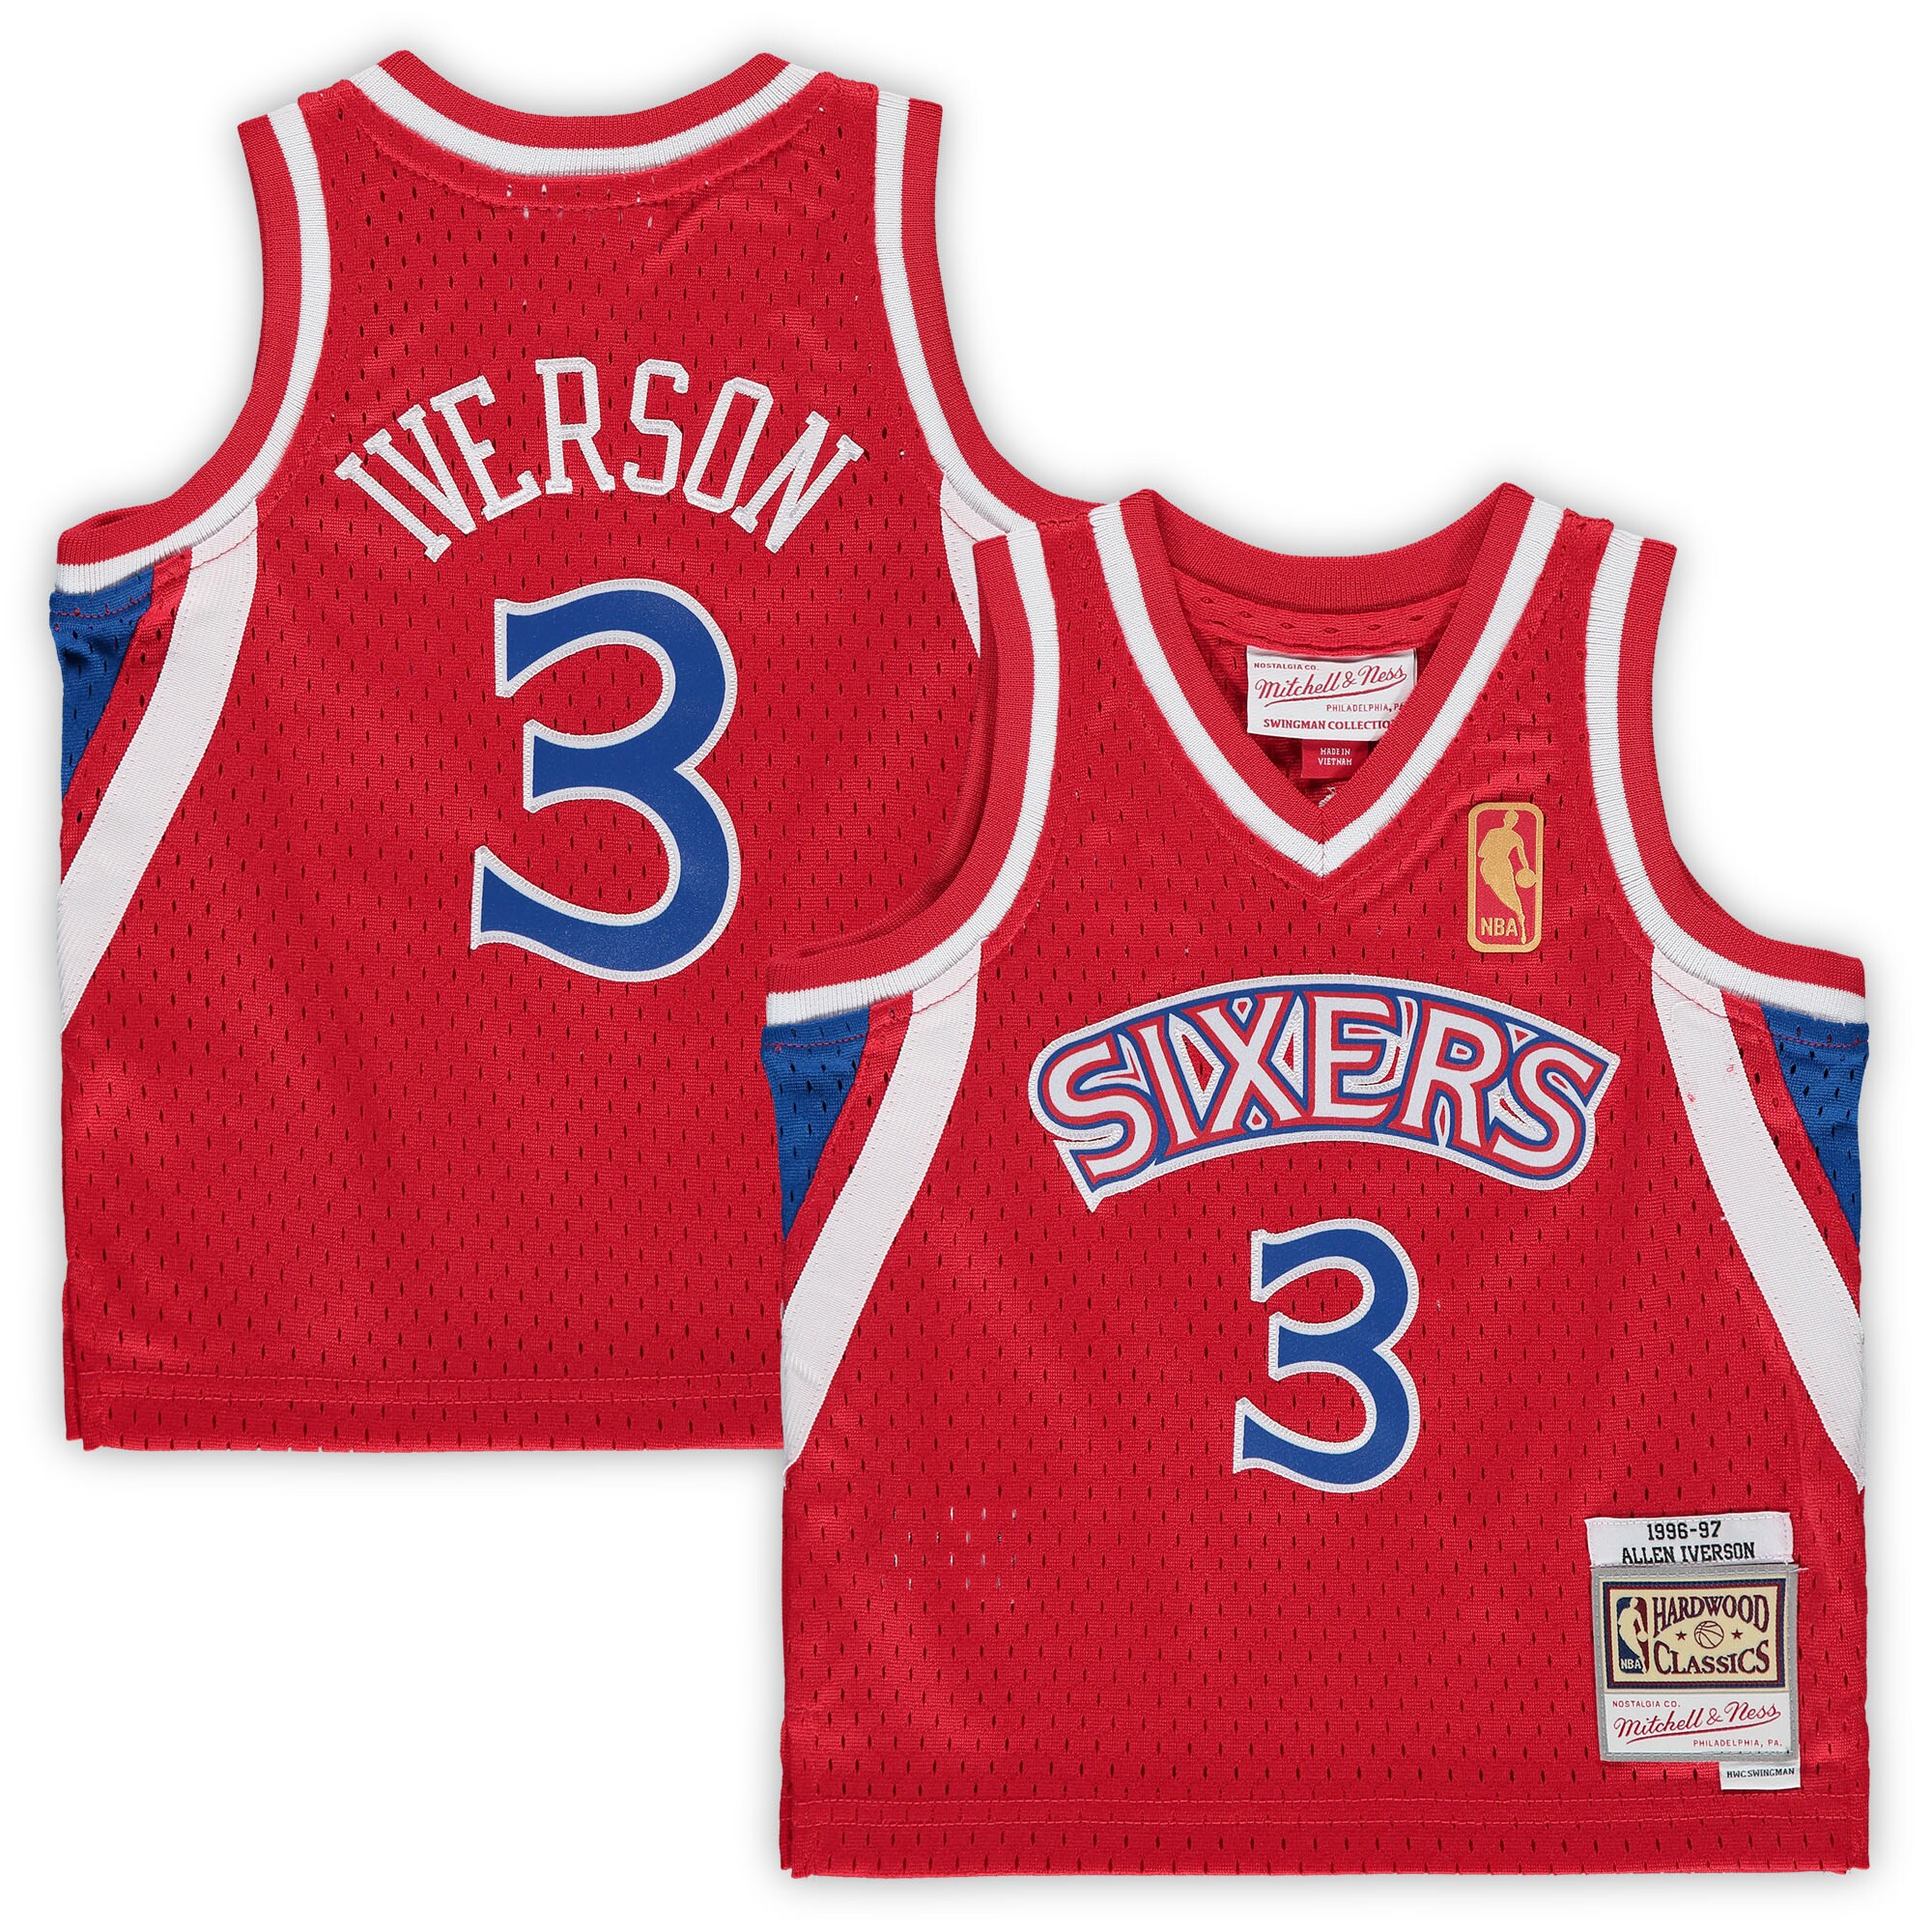 Allen Iverson Philadelphia 76ers Mitchell & Ness Infant 1996/97 Hardwood Classics Retired Player Jersey – Red